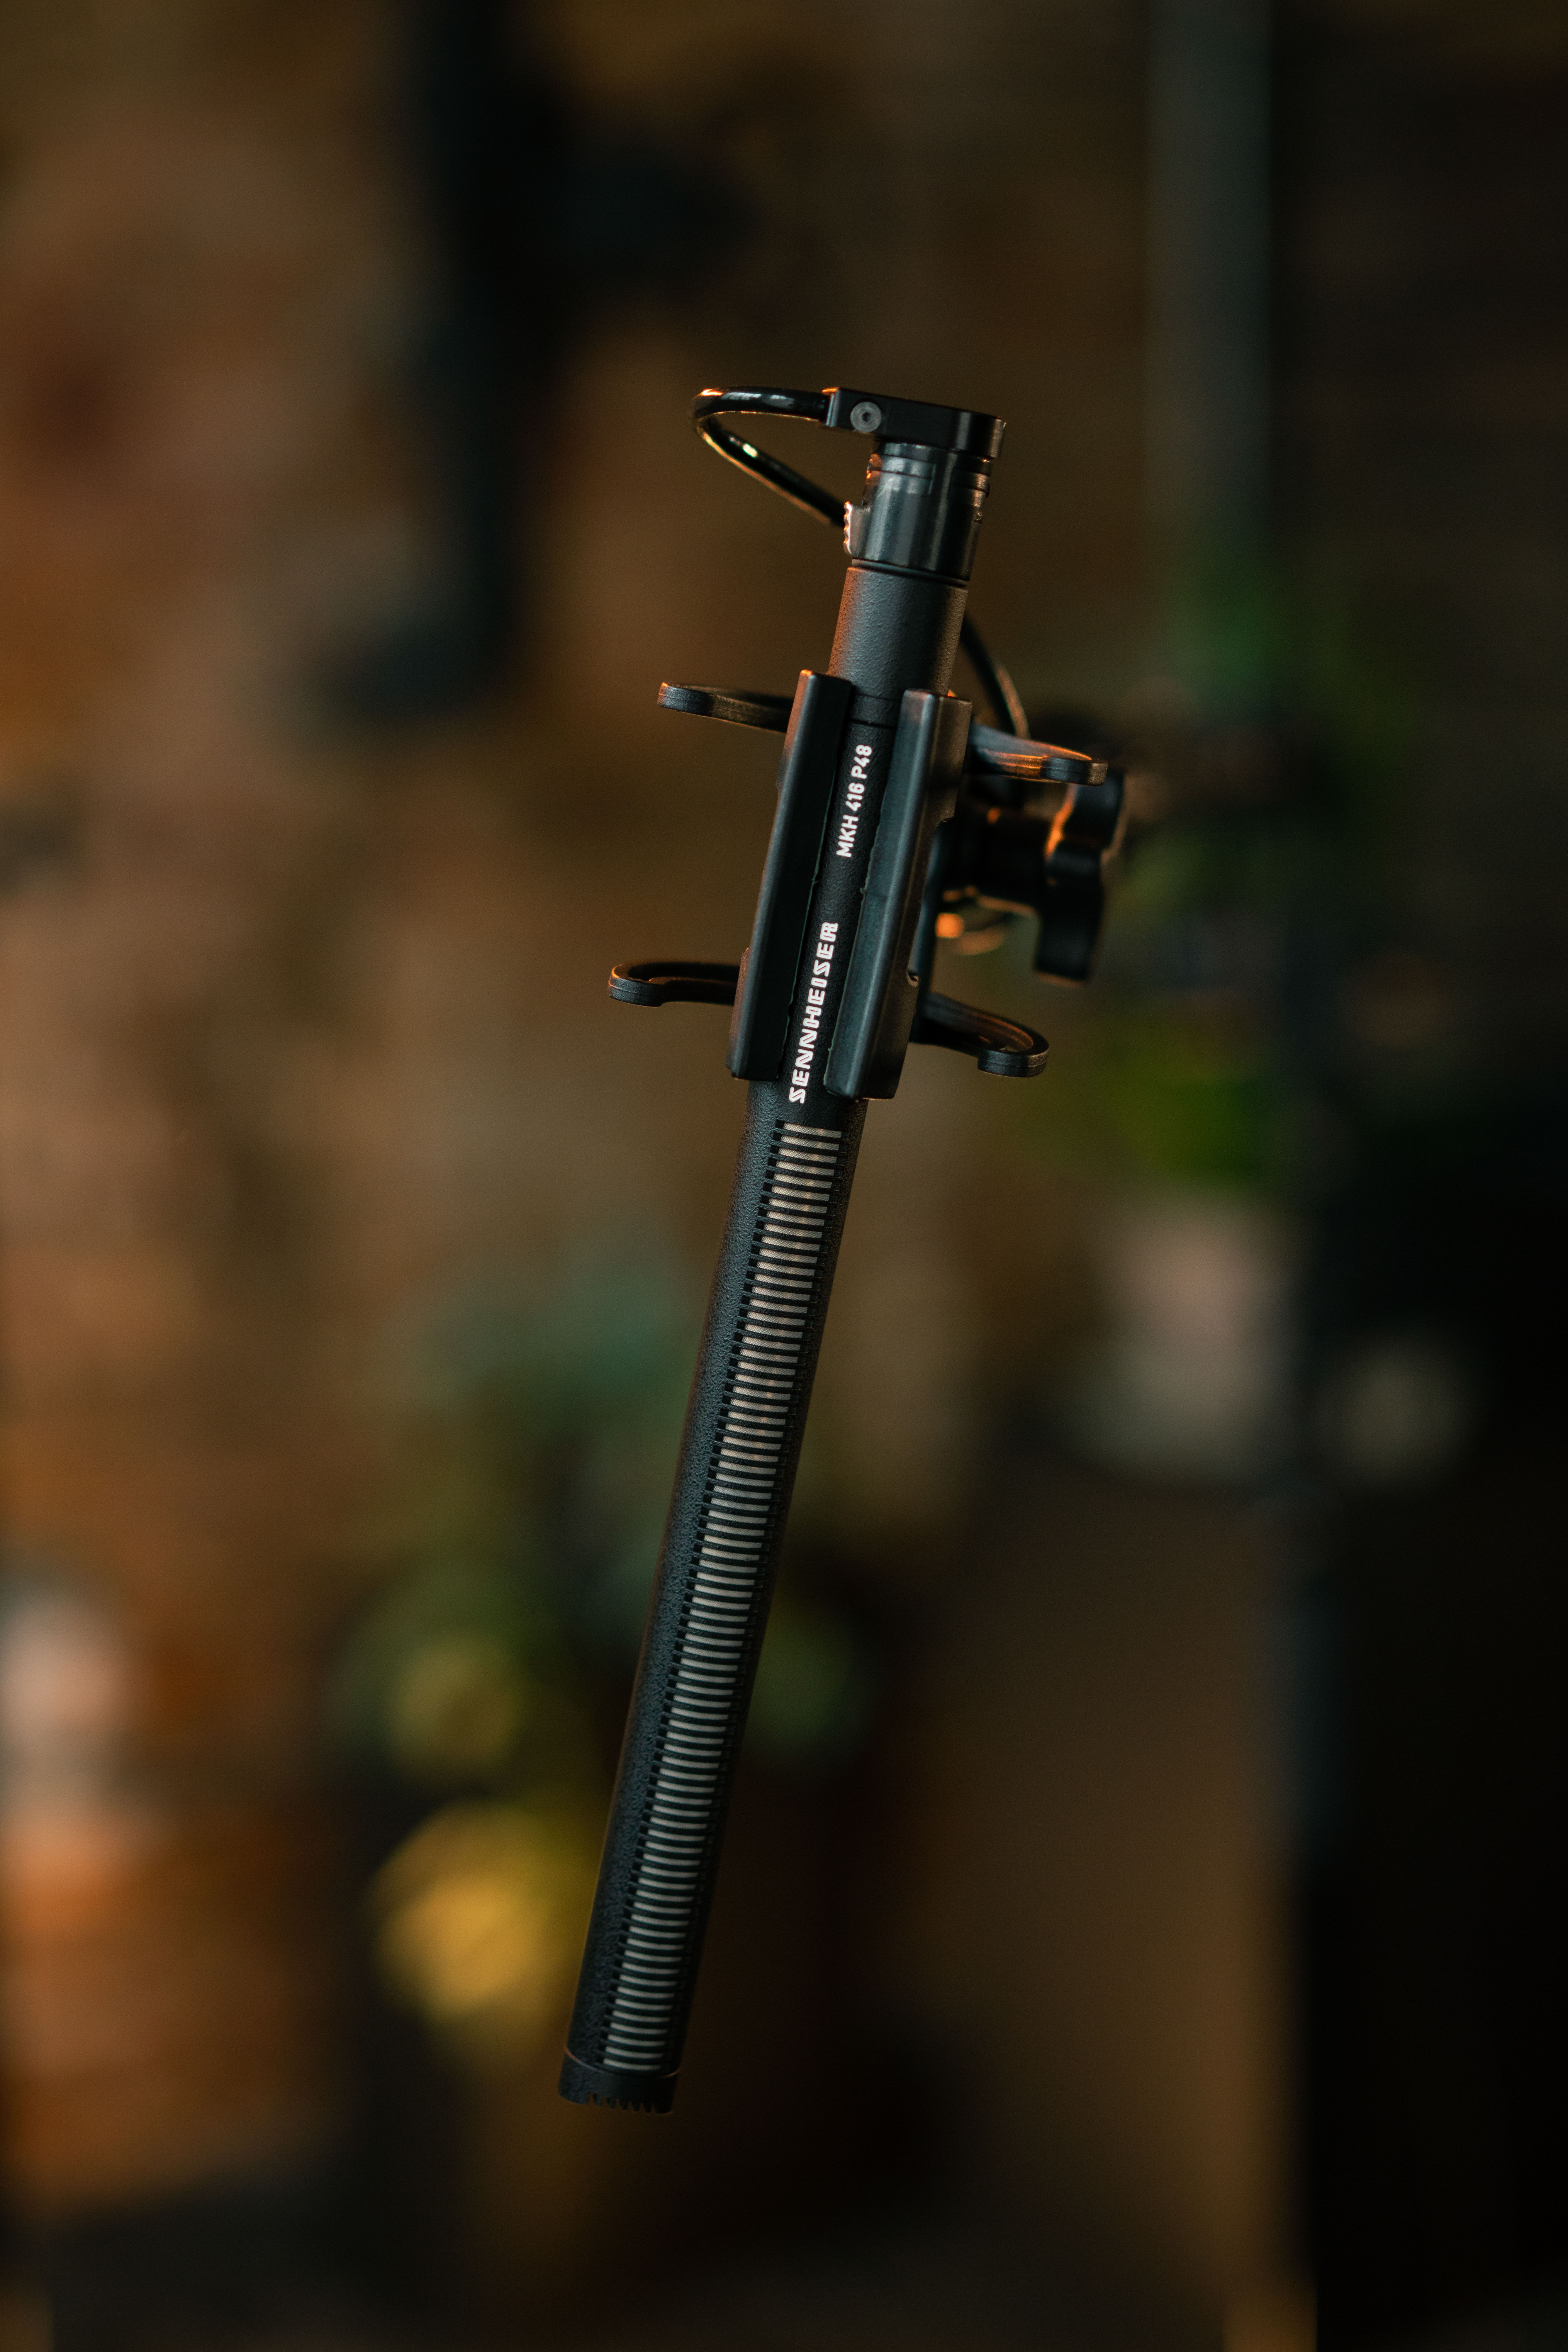 The Sennheiser MKH 416 is a true classic and very much in demand for location recording, cinematography and voice-overs